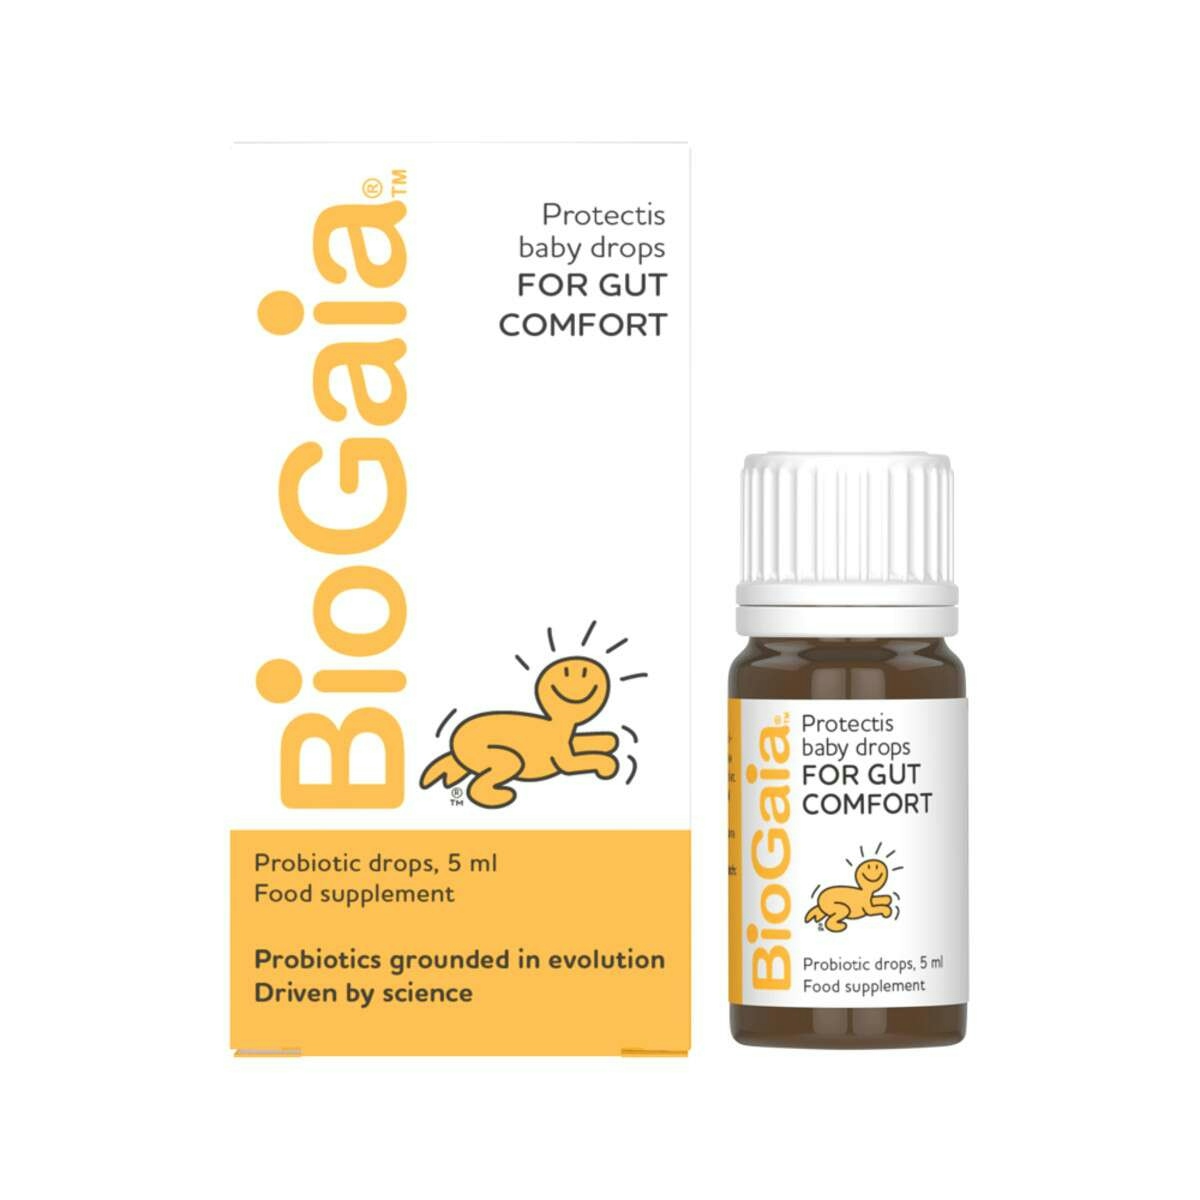 image of Bio-Practica BioGaia Protectis Baby Drops (For Gut Comfort) 5ml on white background 